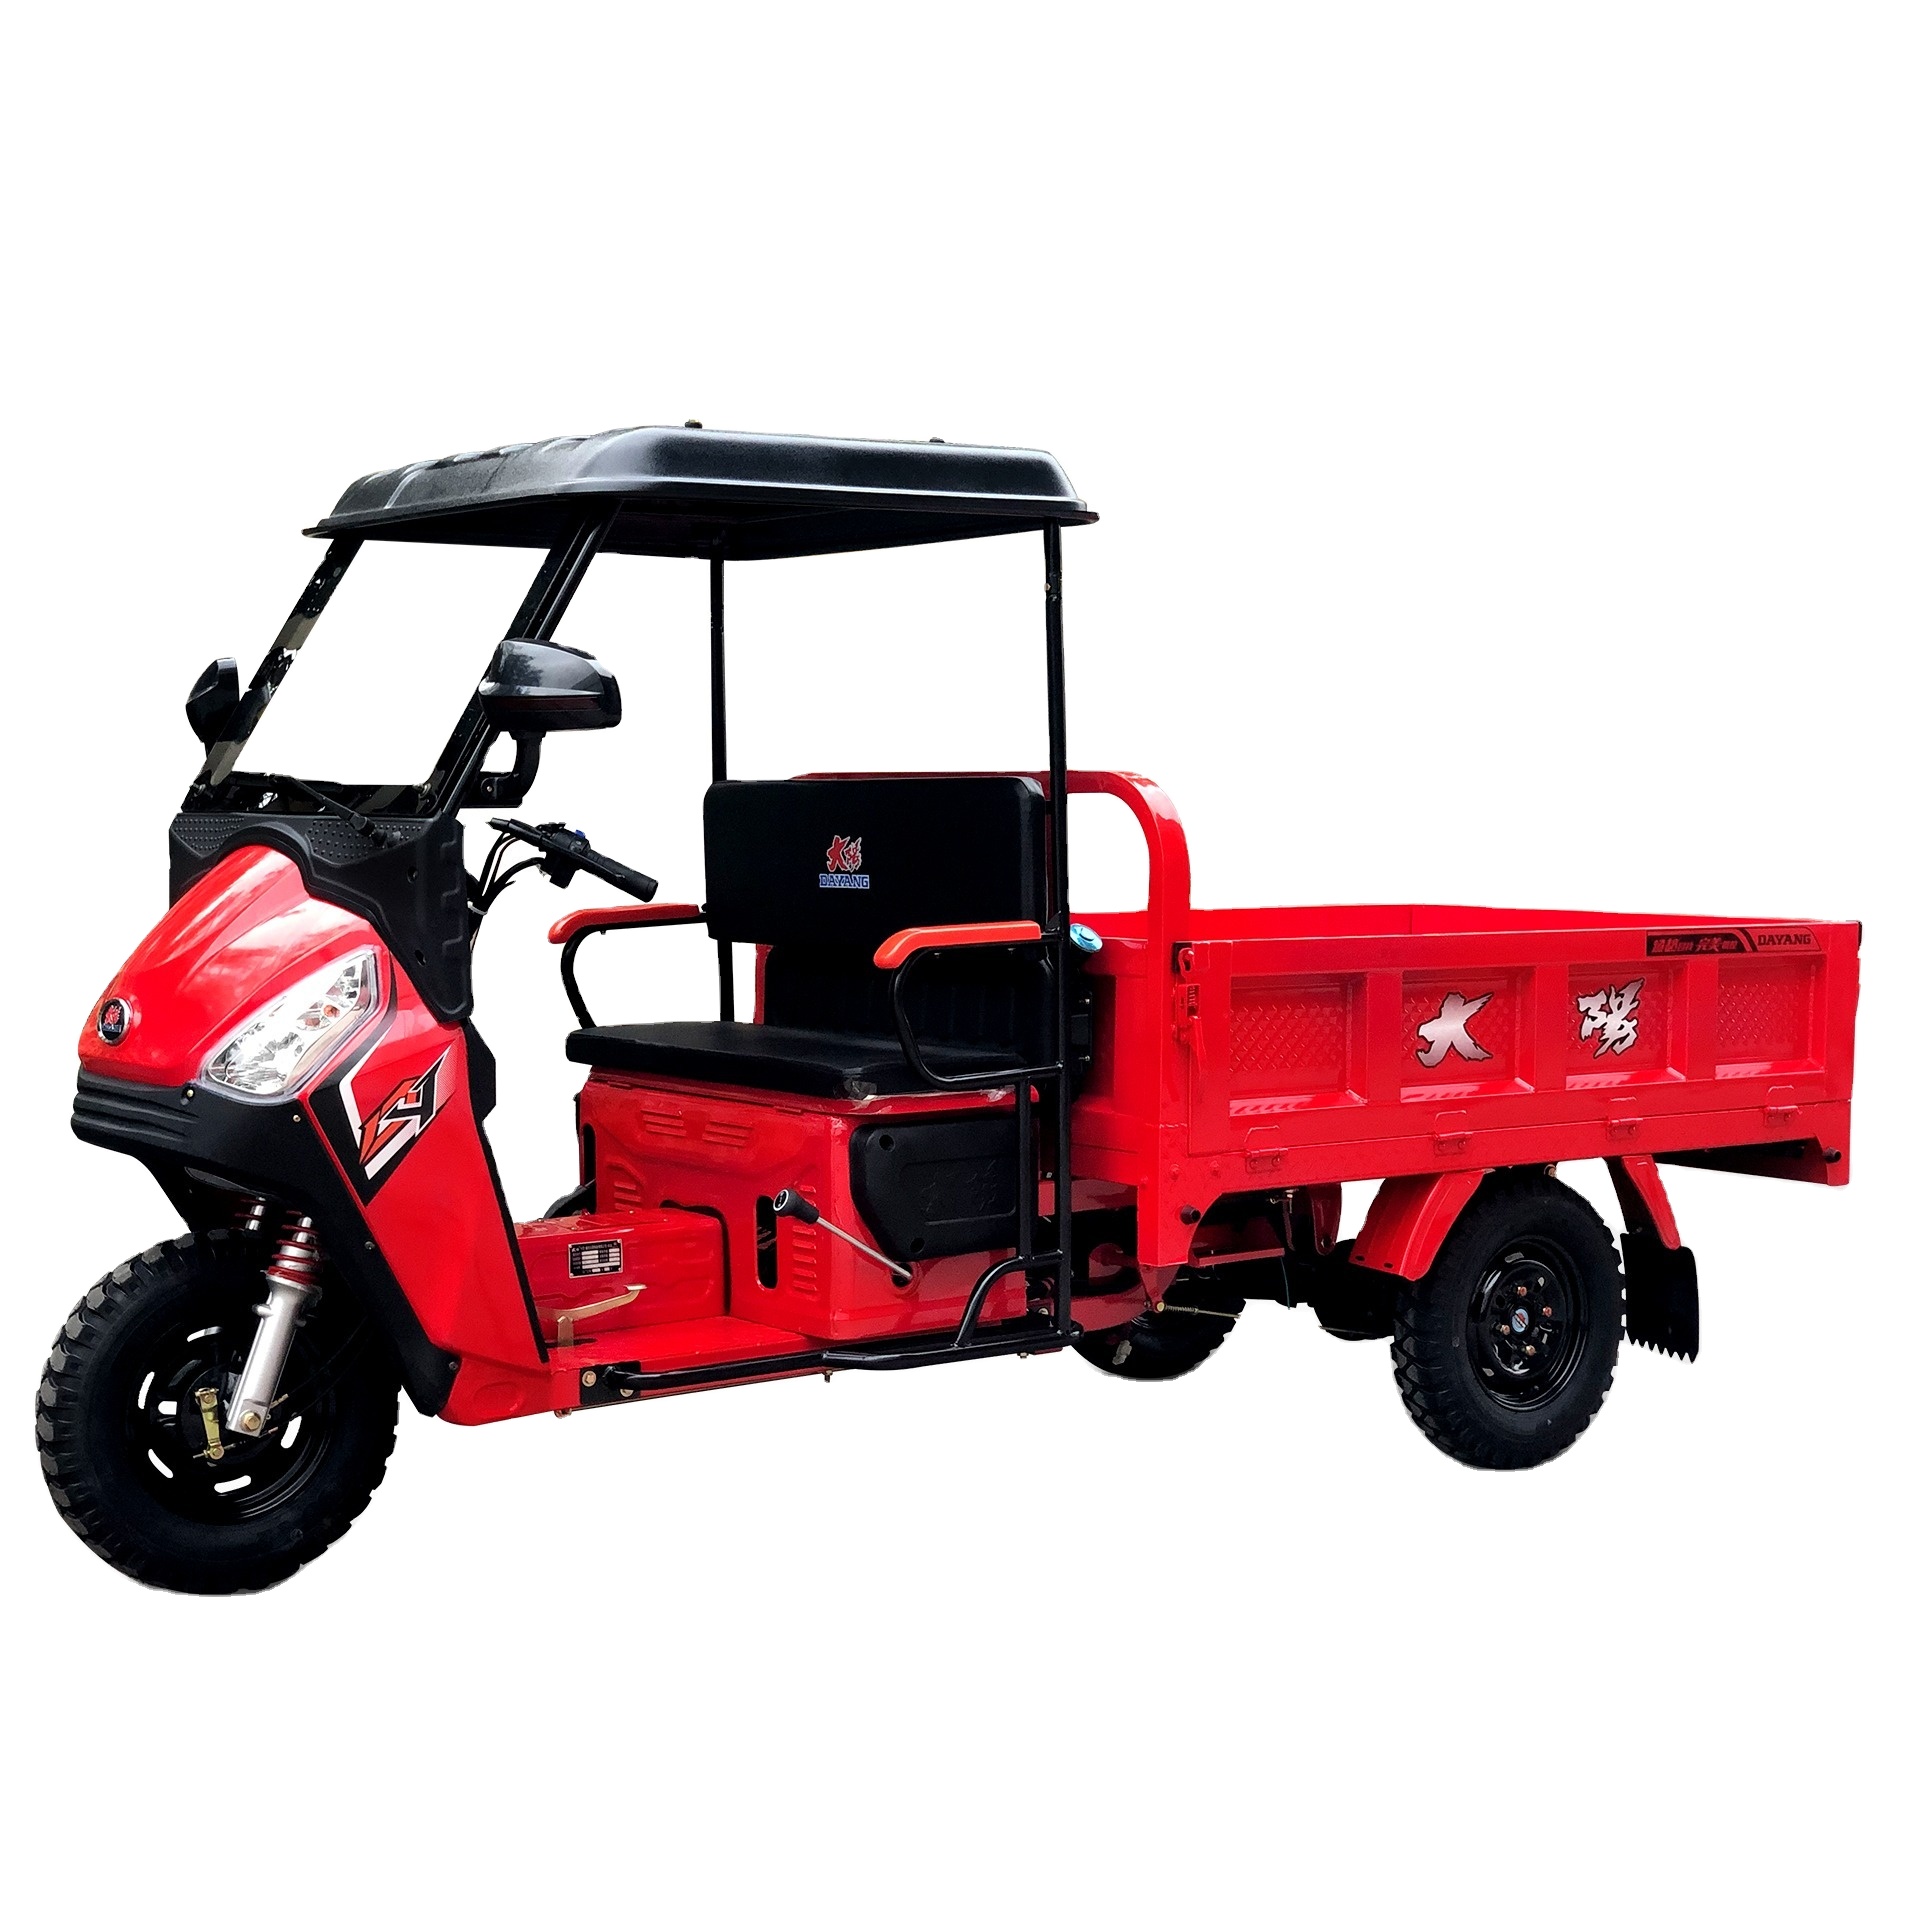 High popularity three wheel motorcycle cargo powerful zongshen engine 110cc automatic big fuel tank cargo tricycle